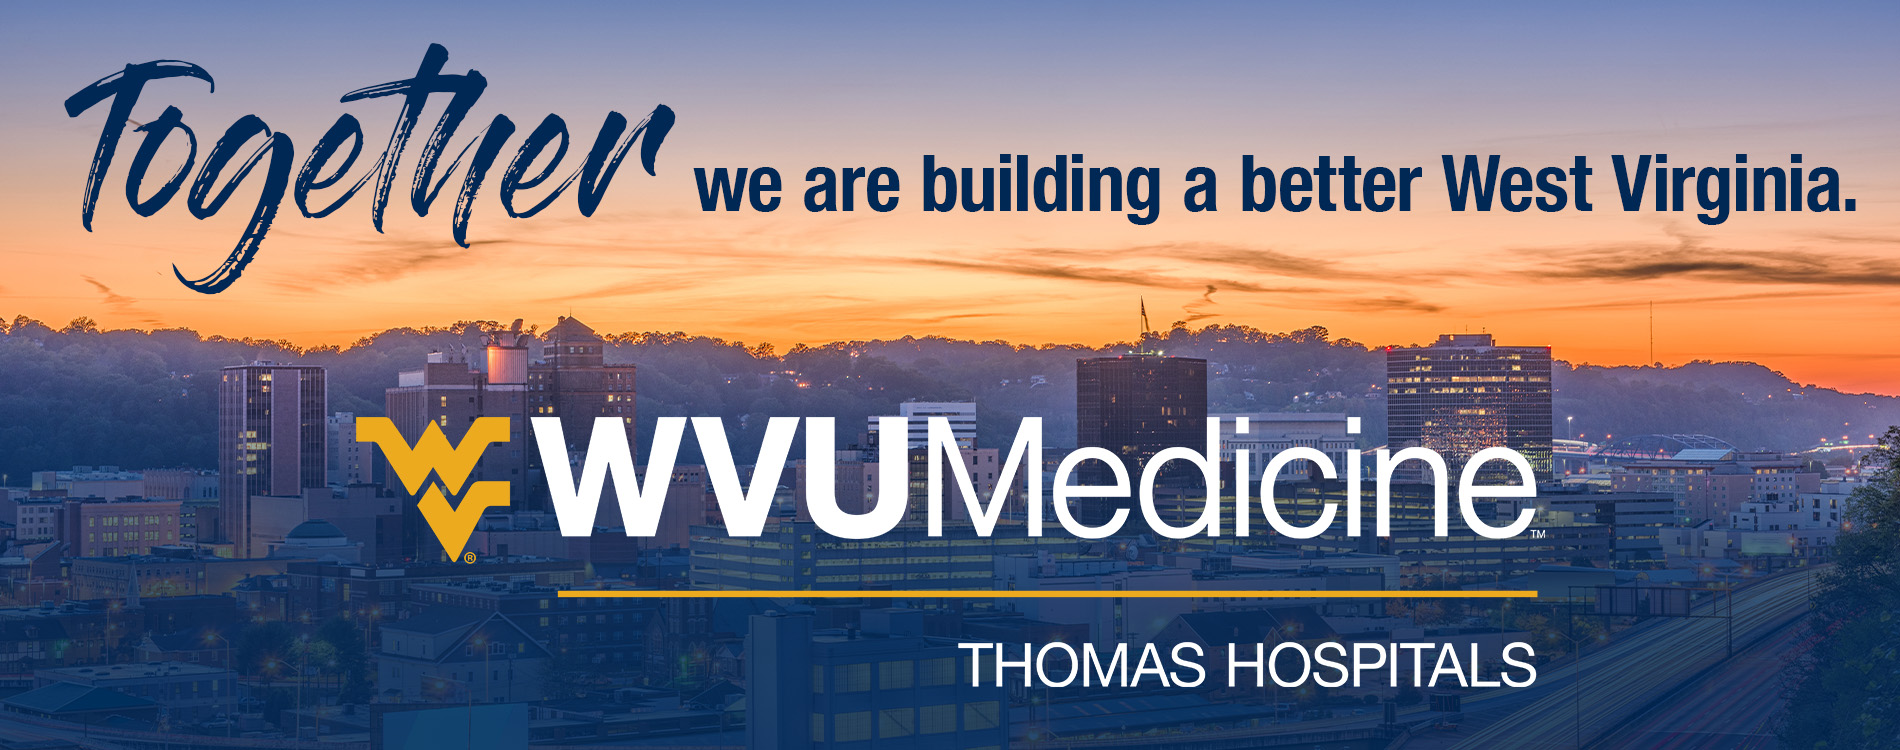 Together We are building a better West Virginia Thomas Hospitals header image